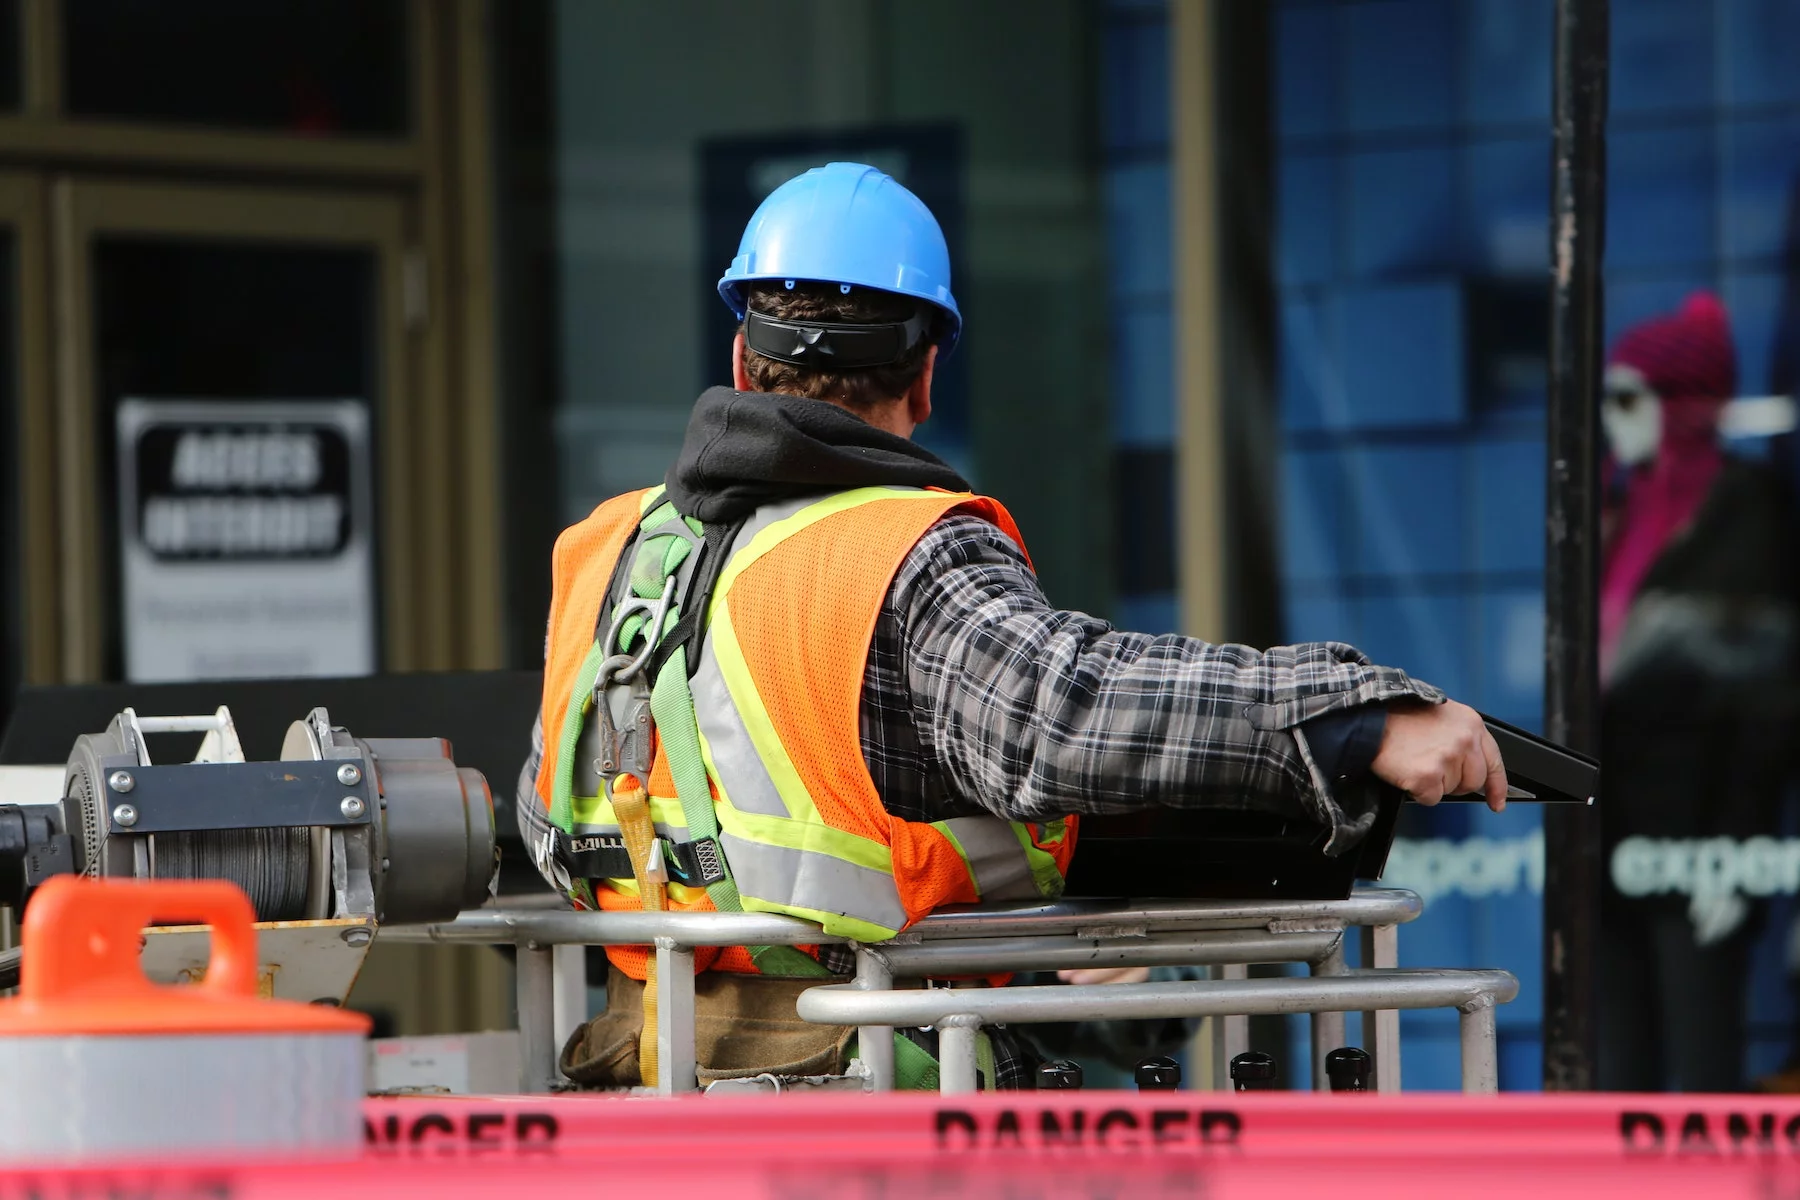 a construction worker in a hard hat and safety vest has his back toward the camera